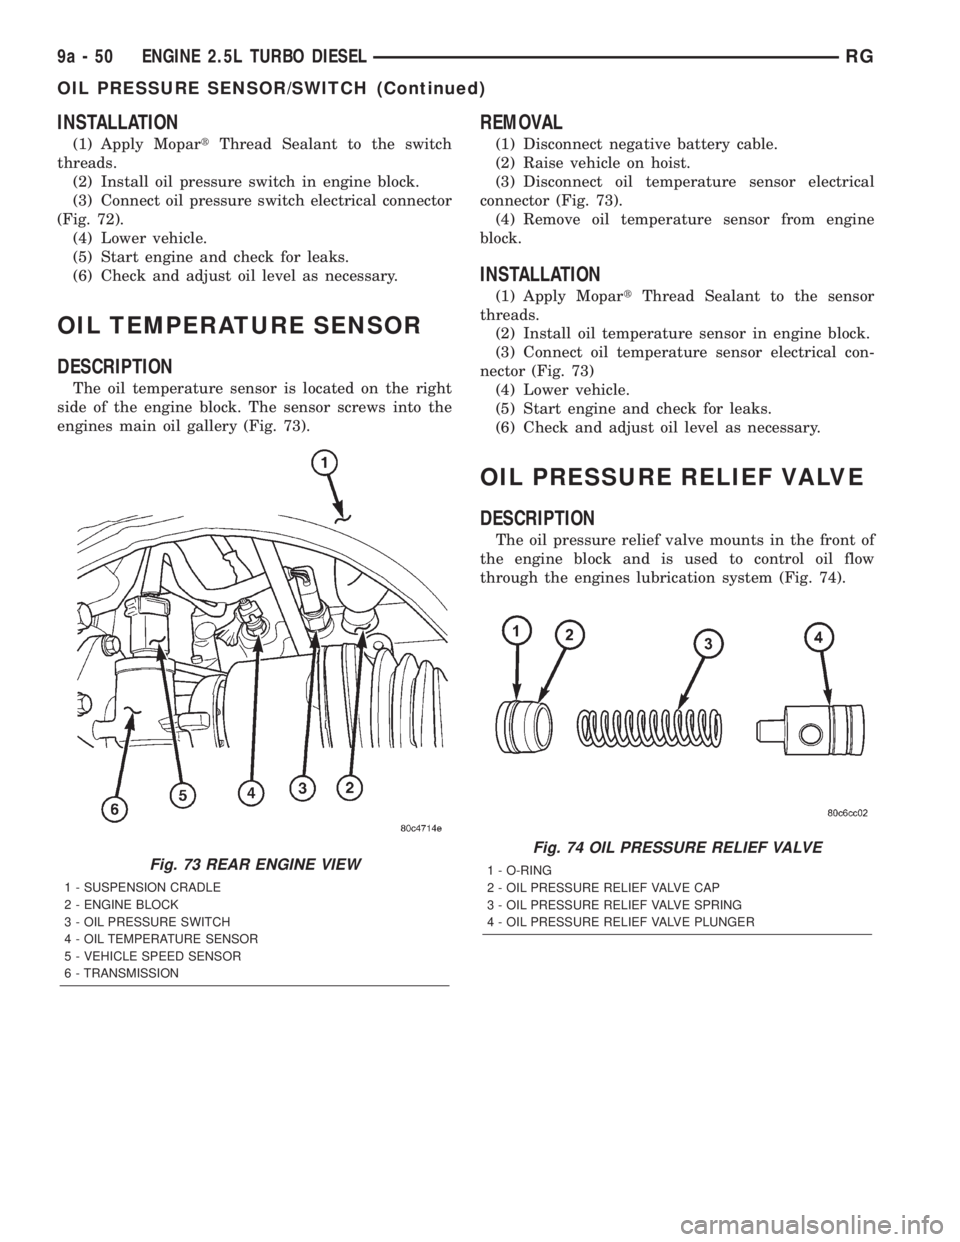 CHRYSLER VOYAGER 2001  Service Manual INSTALLATION
(1) Apply MopartThread Sealant to the switch
threads.
(2) Install oil pressure switch in engine block.
(3) Connect oil pressure switch electrical connector
(Fig. 72).
(4) Lower vehicle.
(